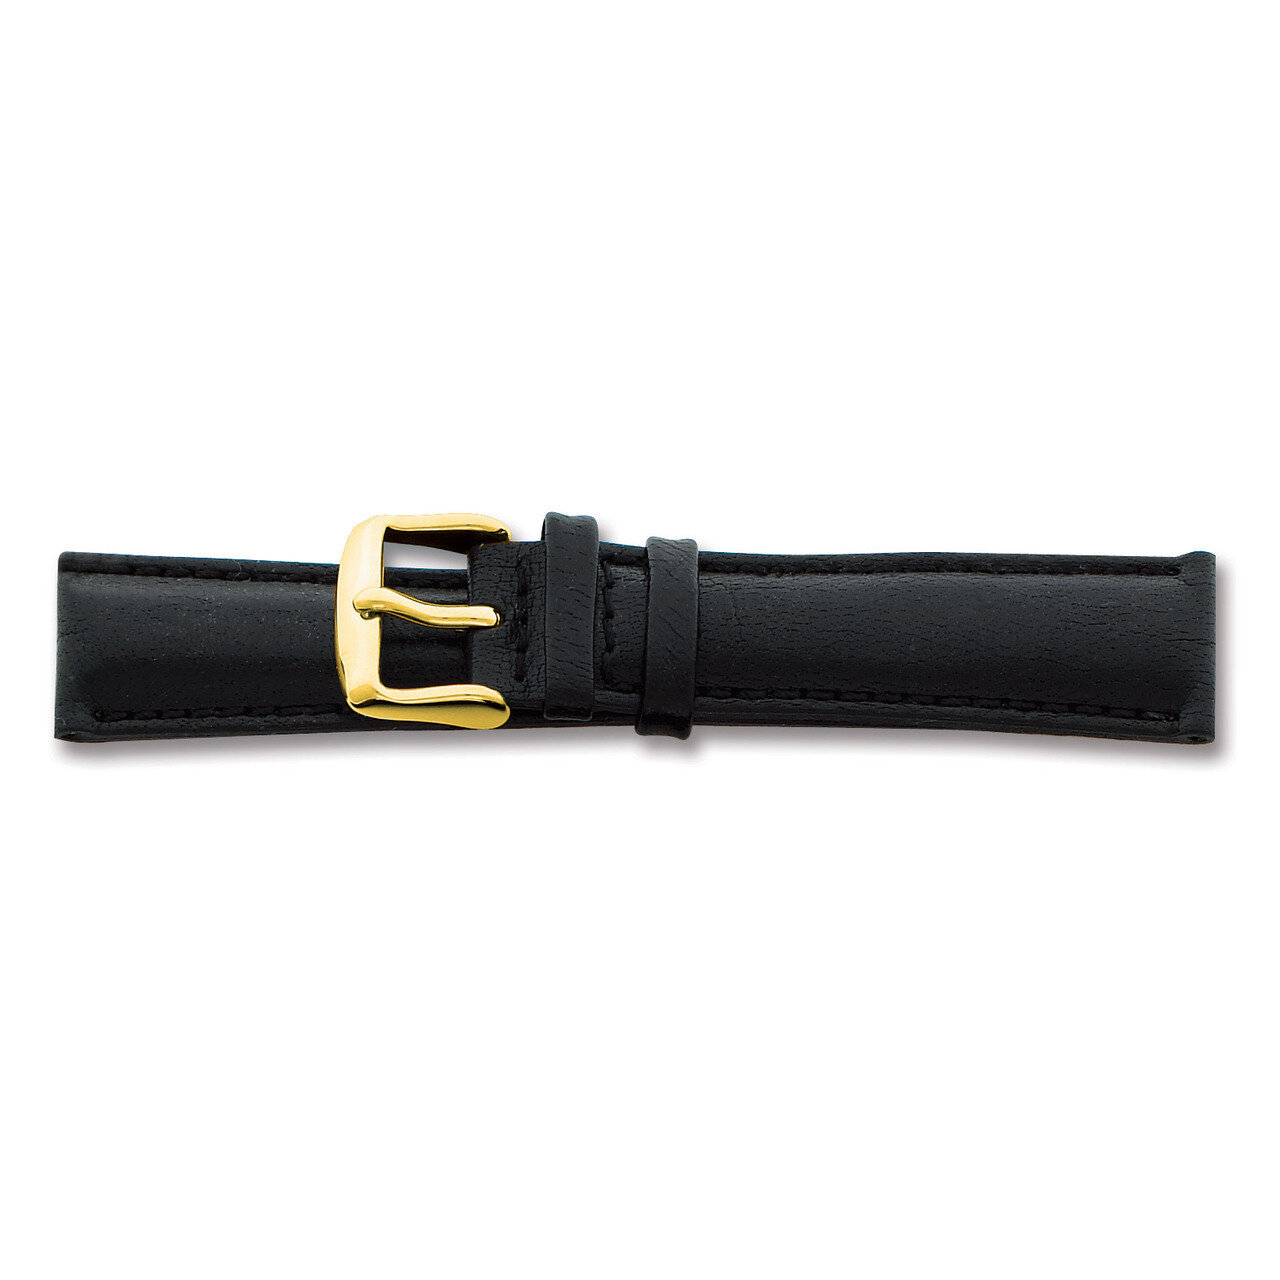 22mm Short Black Smooth Leather Chrono Bkl Watch Band 6.75 Inch Gold-tone BAY141S-22